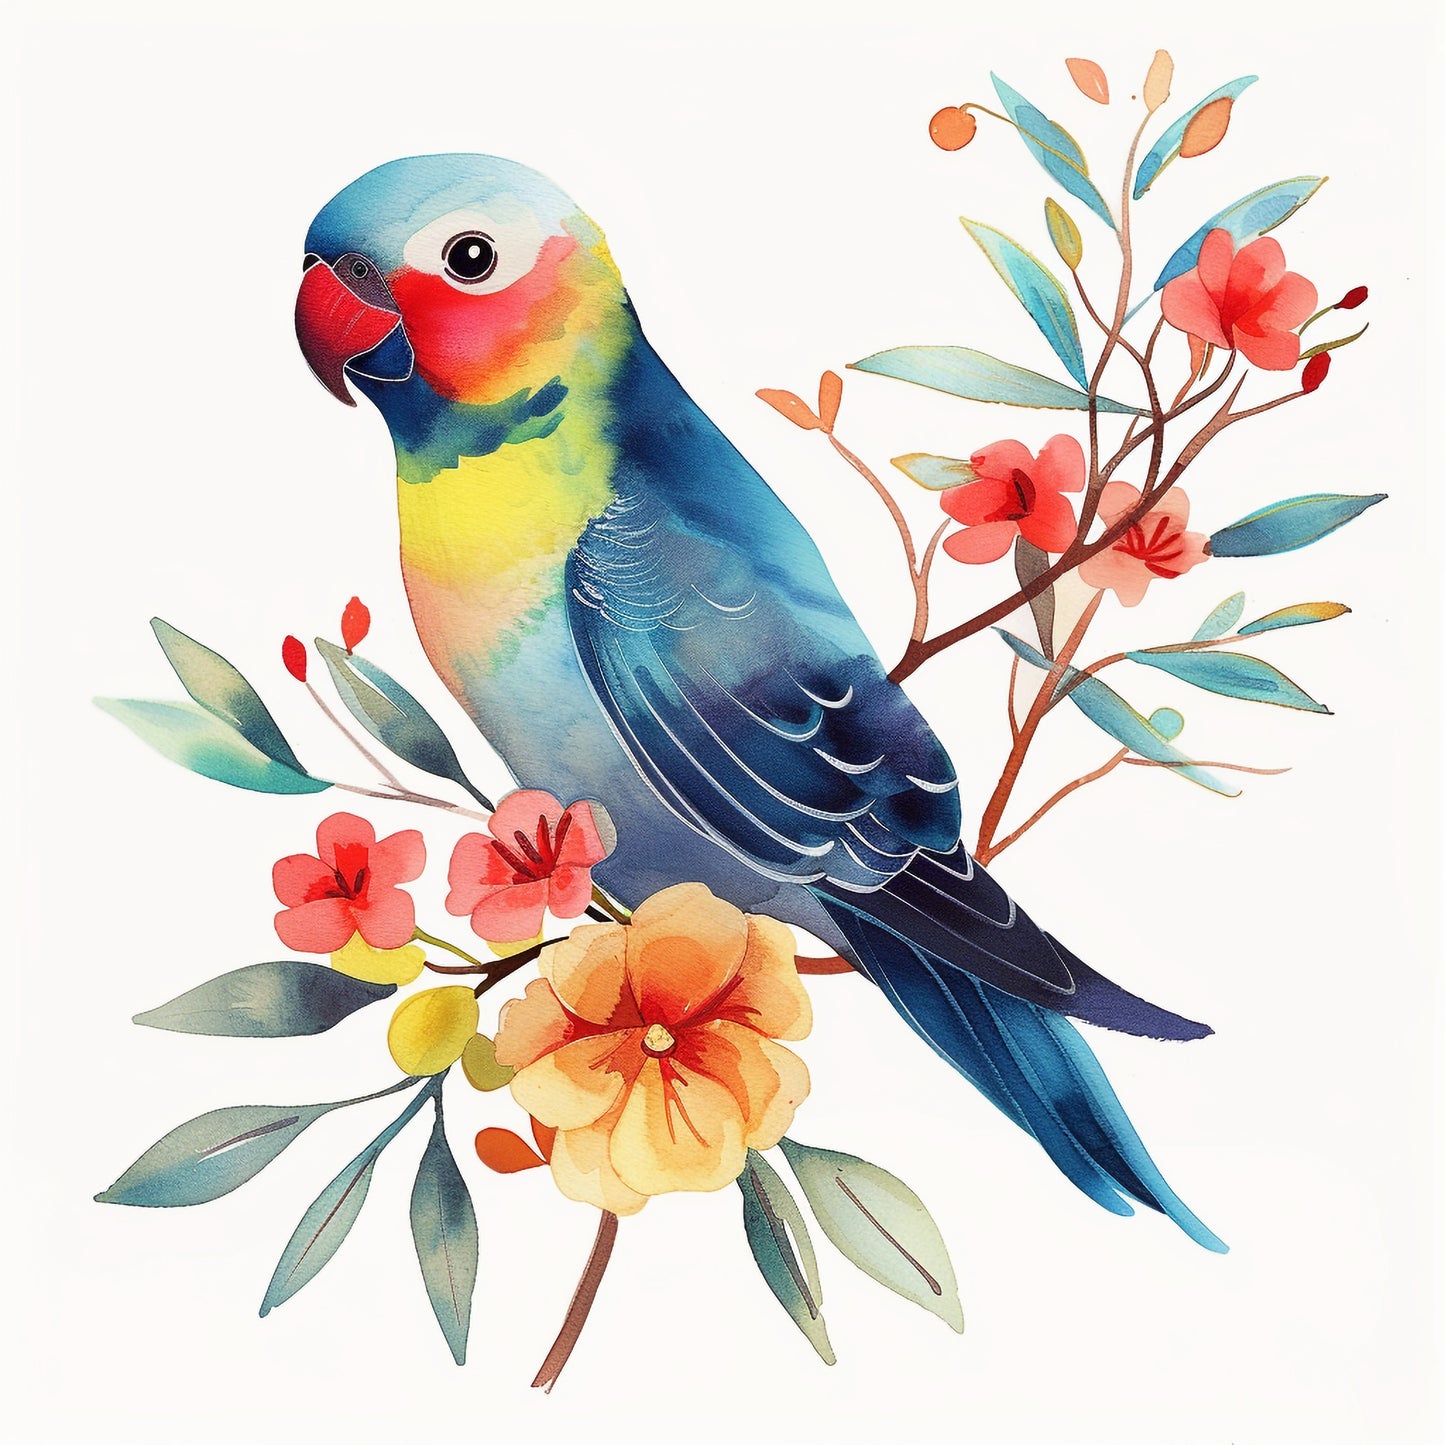 Colorful Parrot Watercolor Illustration with Flowers